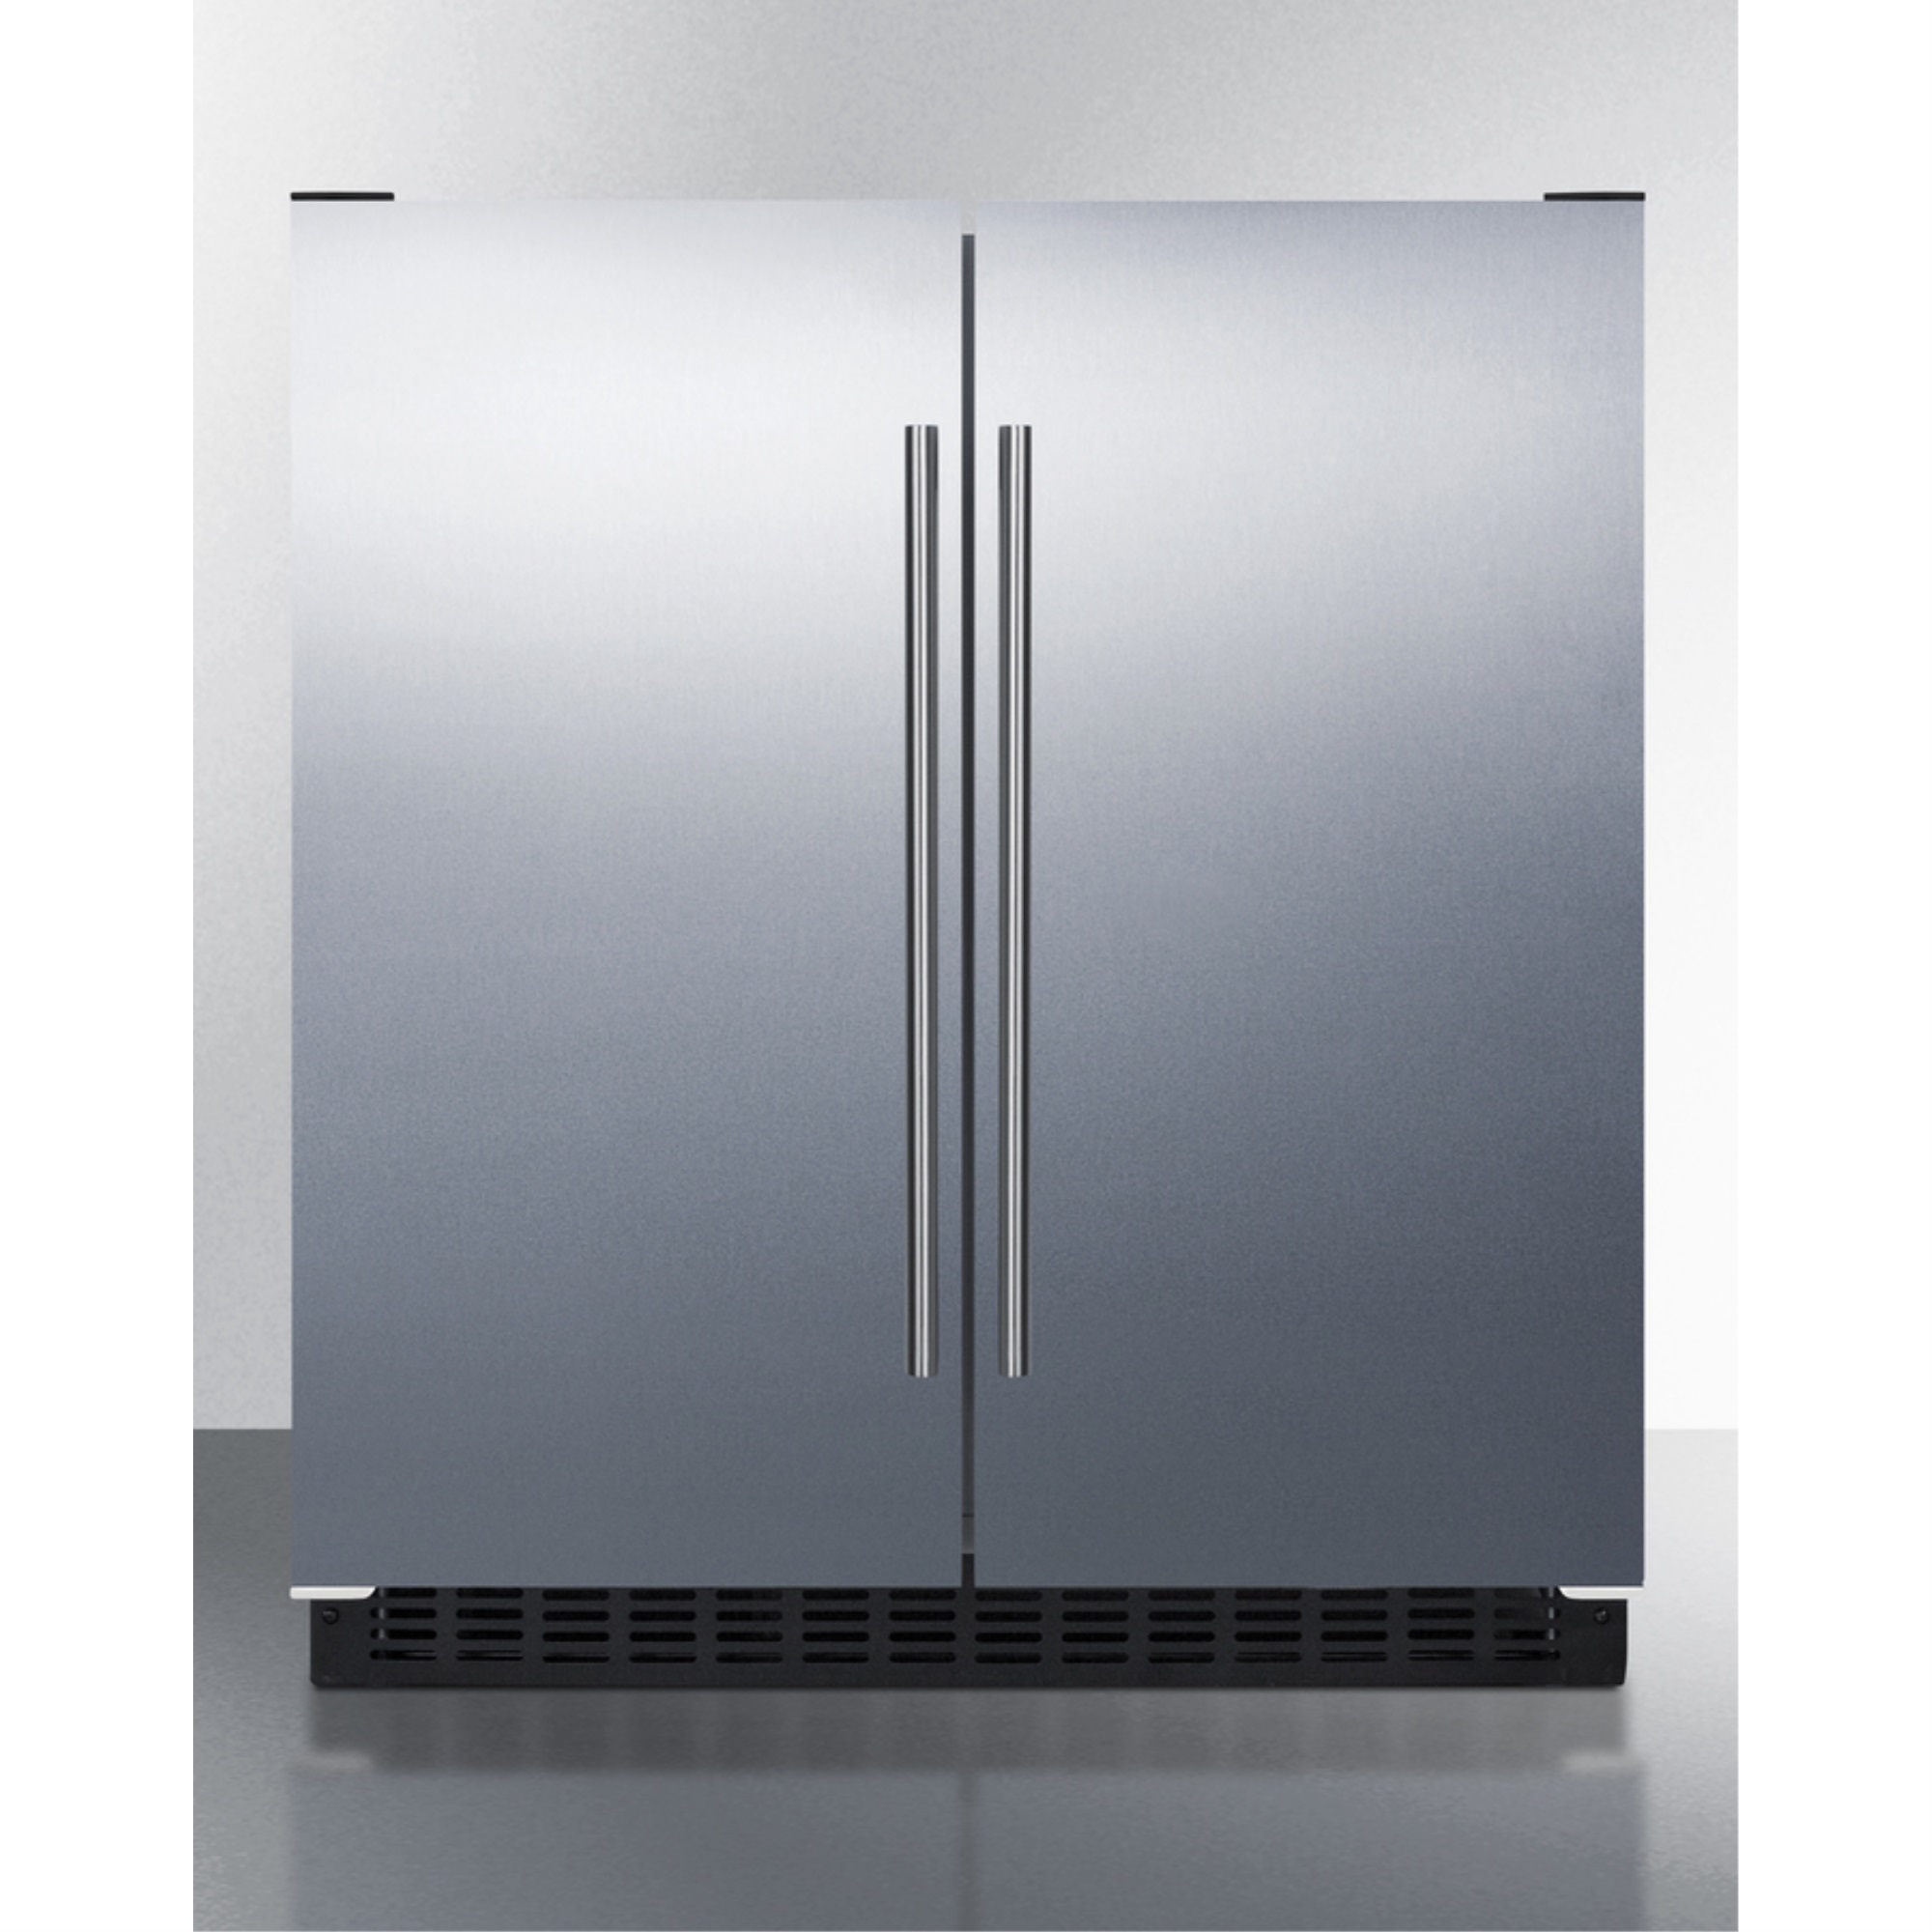 30" wide undercounter frost-free side-by-side refrigerator-freezer with stainless steel doors, white cabinet, locks, stainless steel handles, and digital controls - image 1 of 5